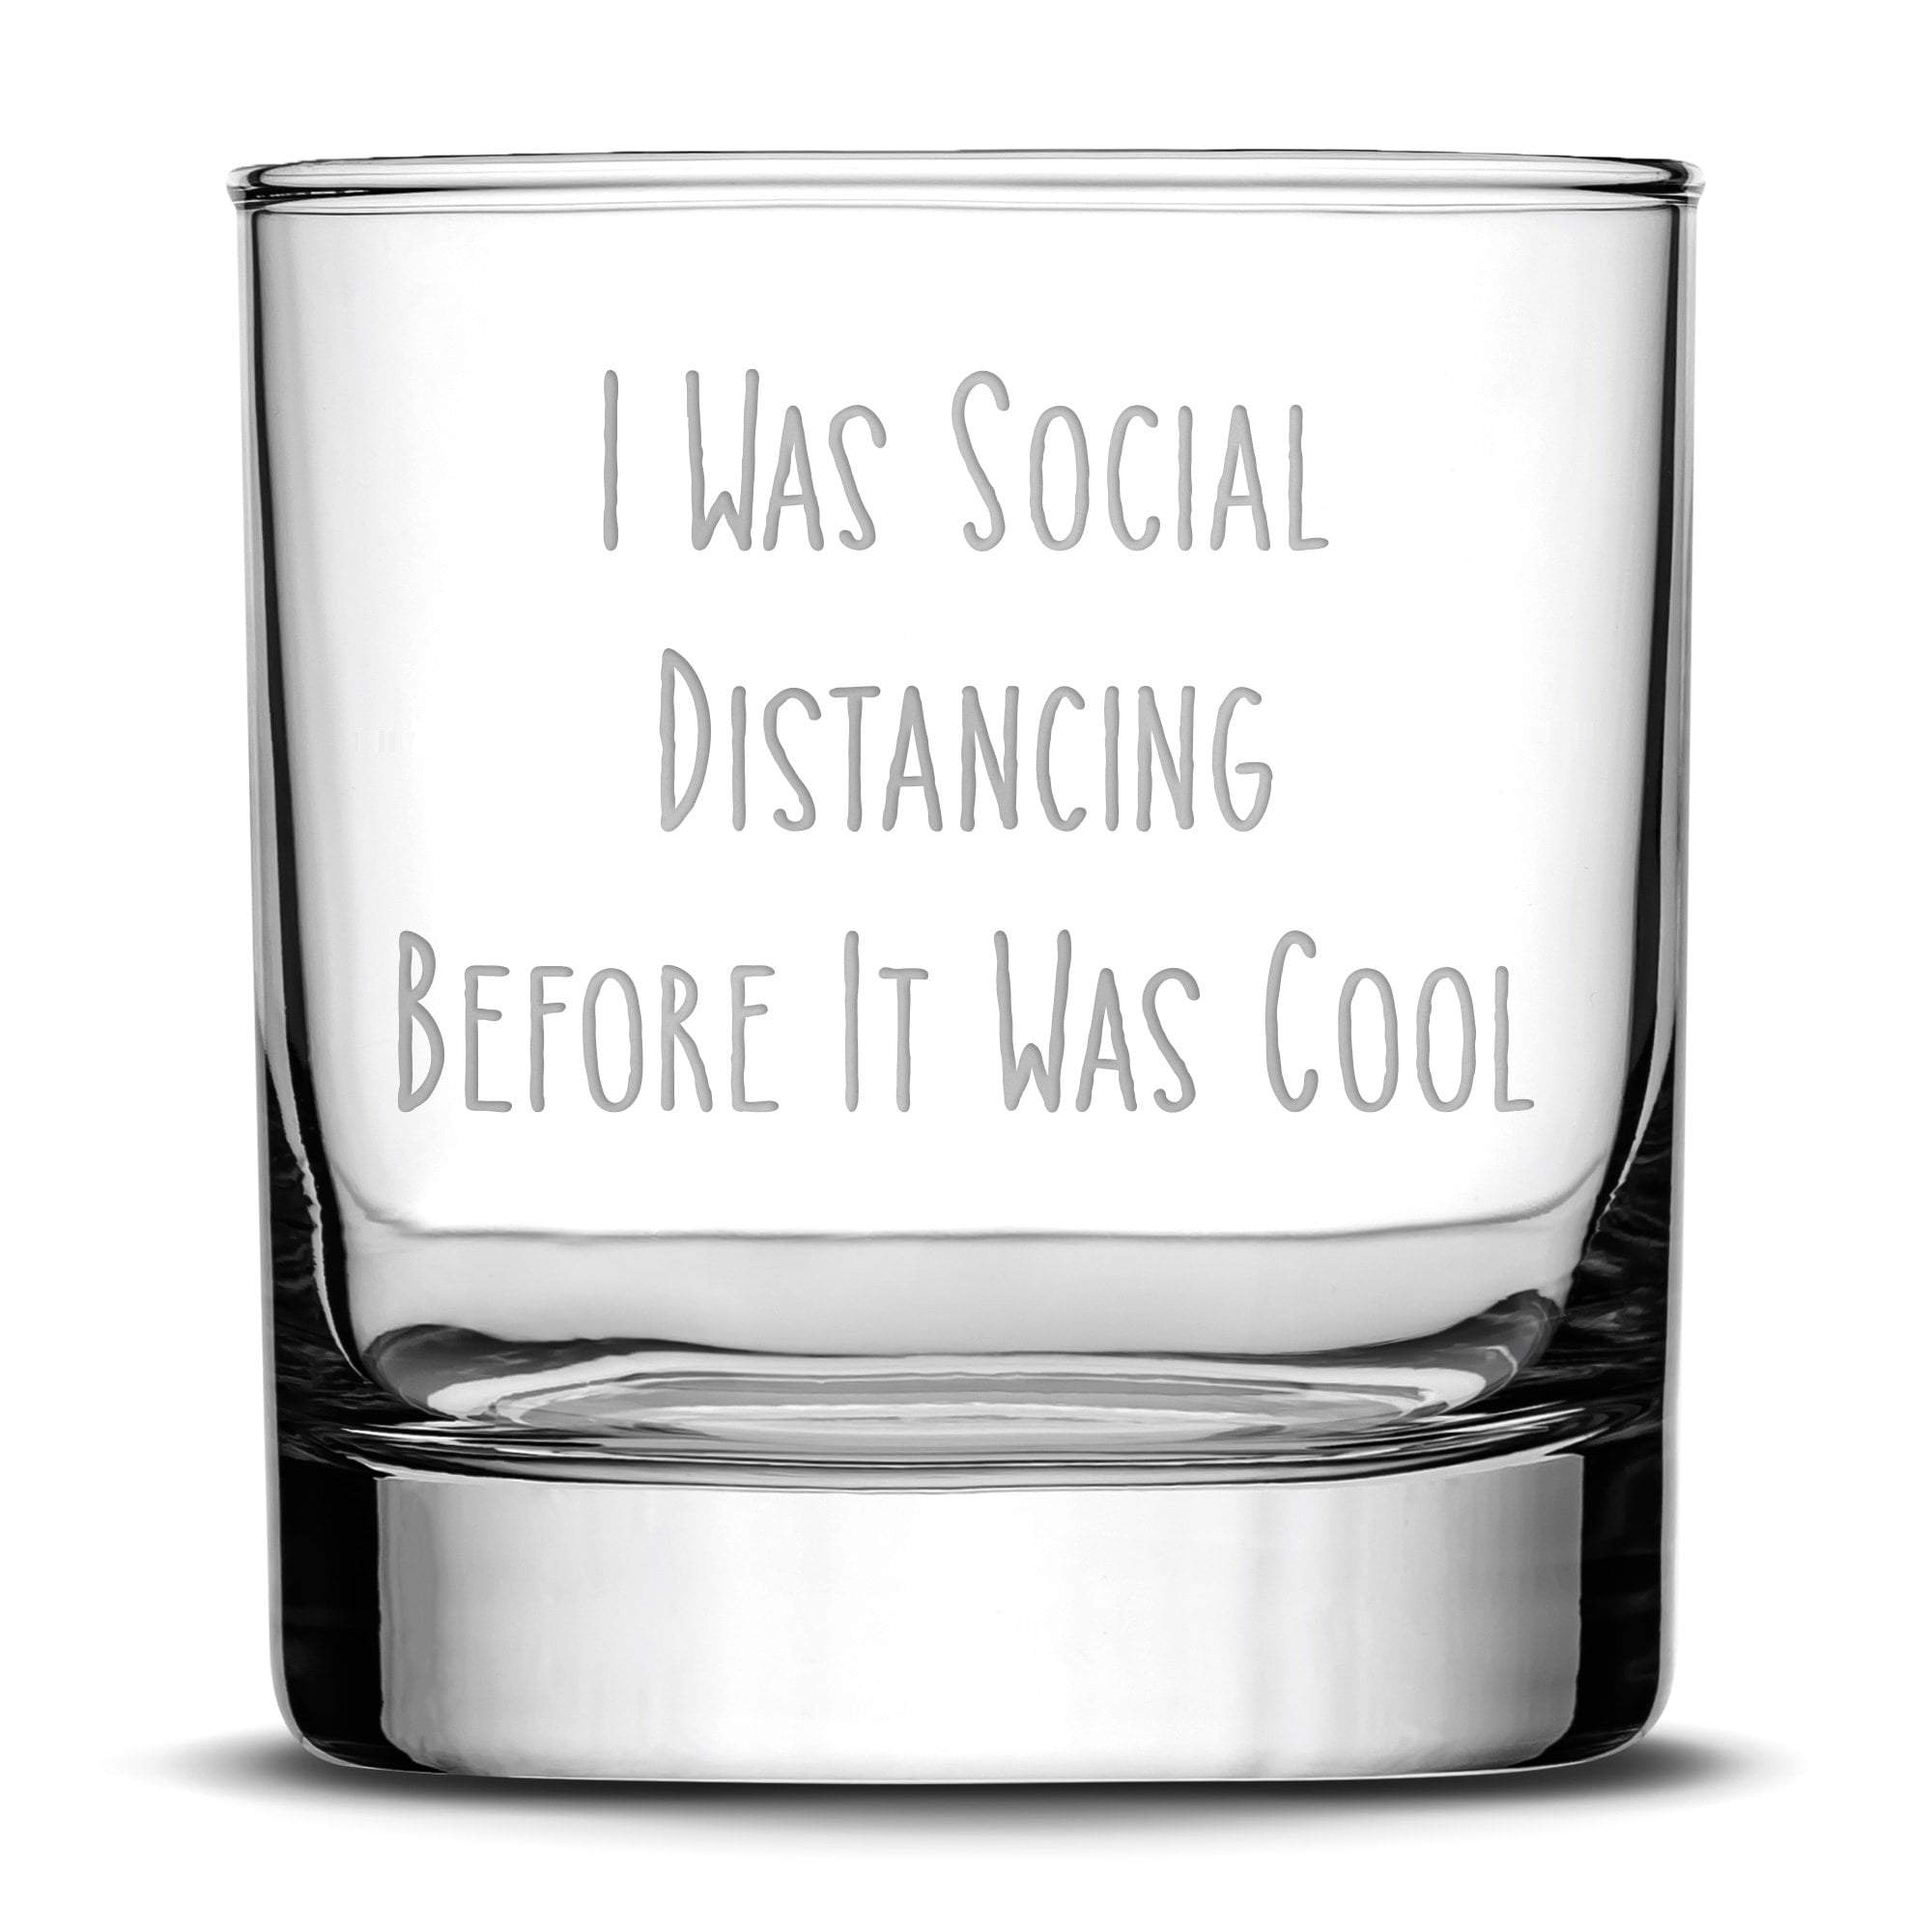 Premium Coronavirus Whiskey Glass, Etched Social Distancing Drinking Glasses,  Made in USA, 11oz